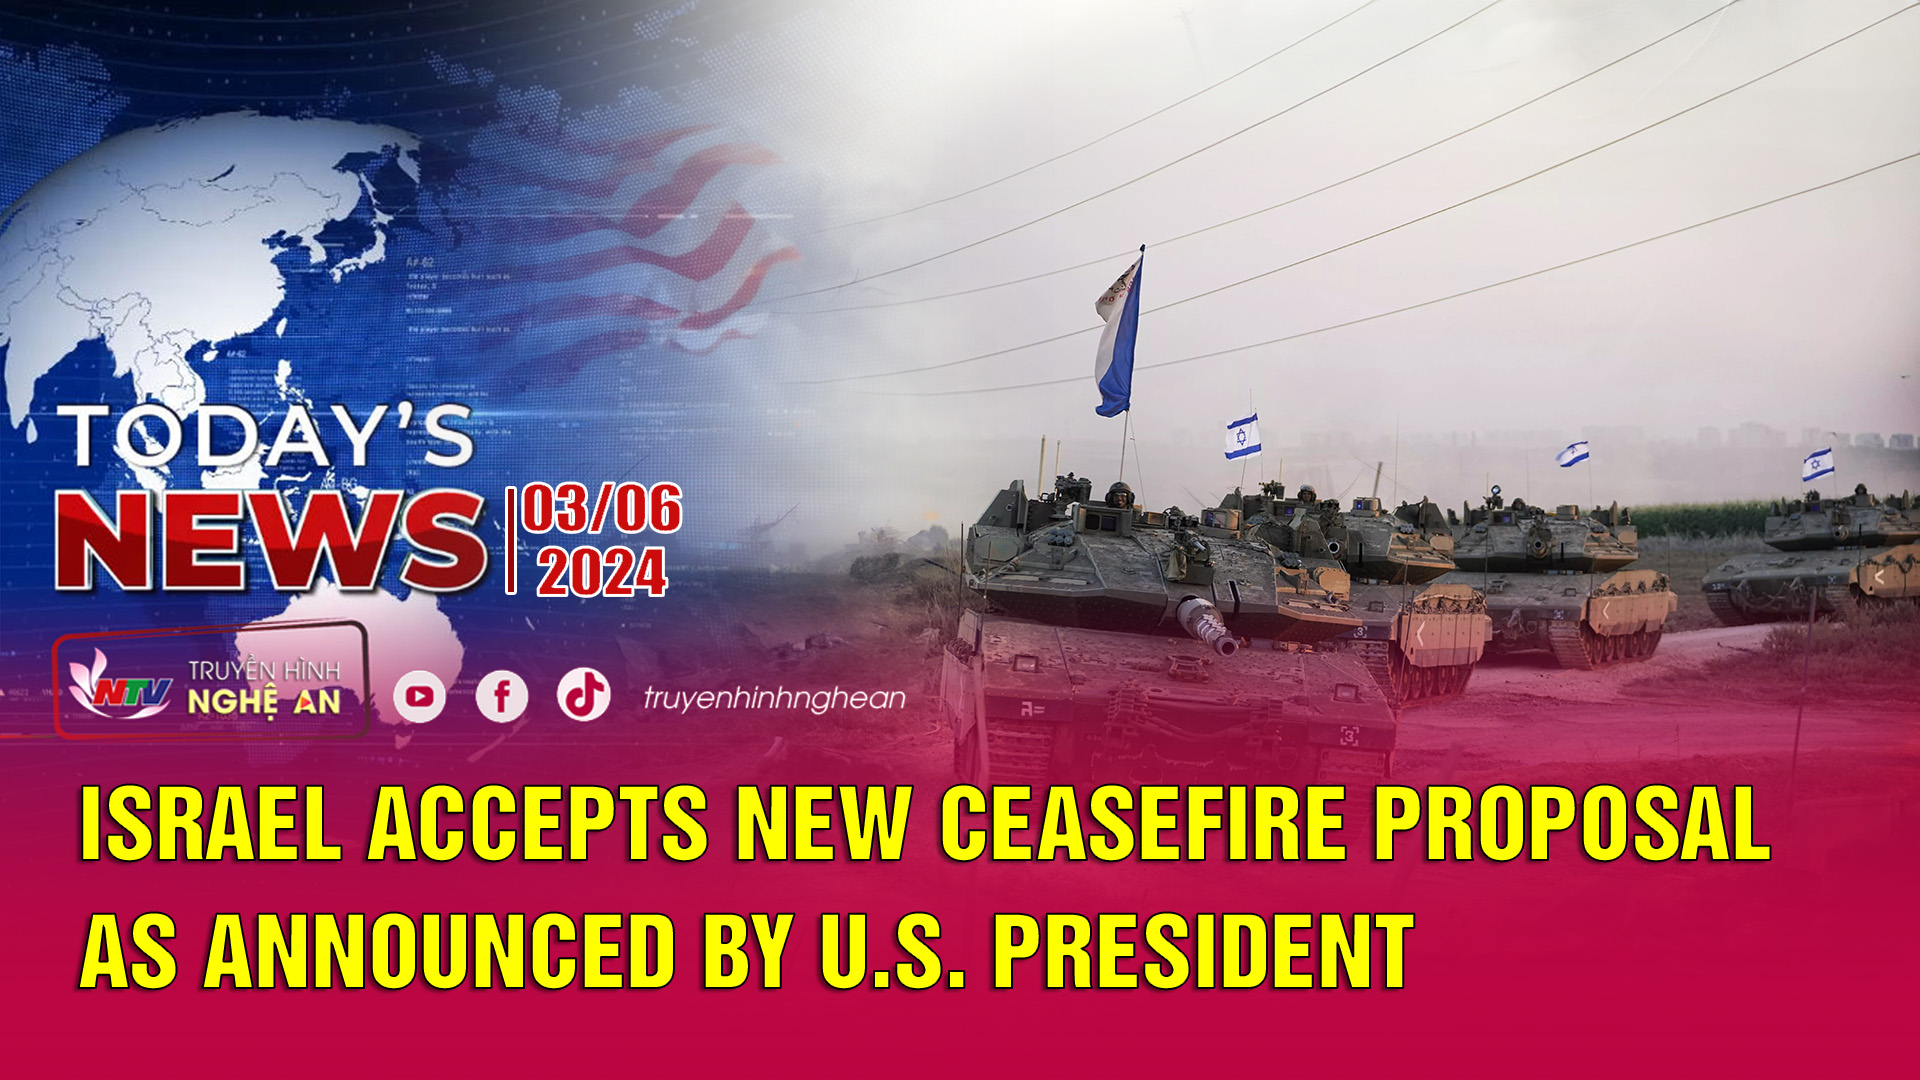 Today's News 03/06/2024: Israel accepts new ceasefire proposal as announced by U.S. President